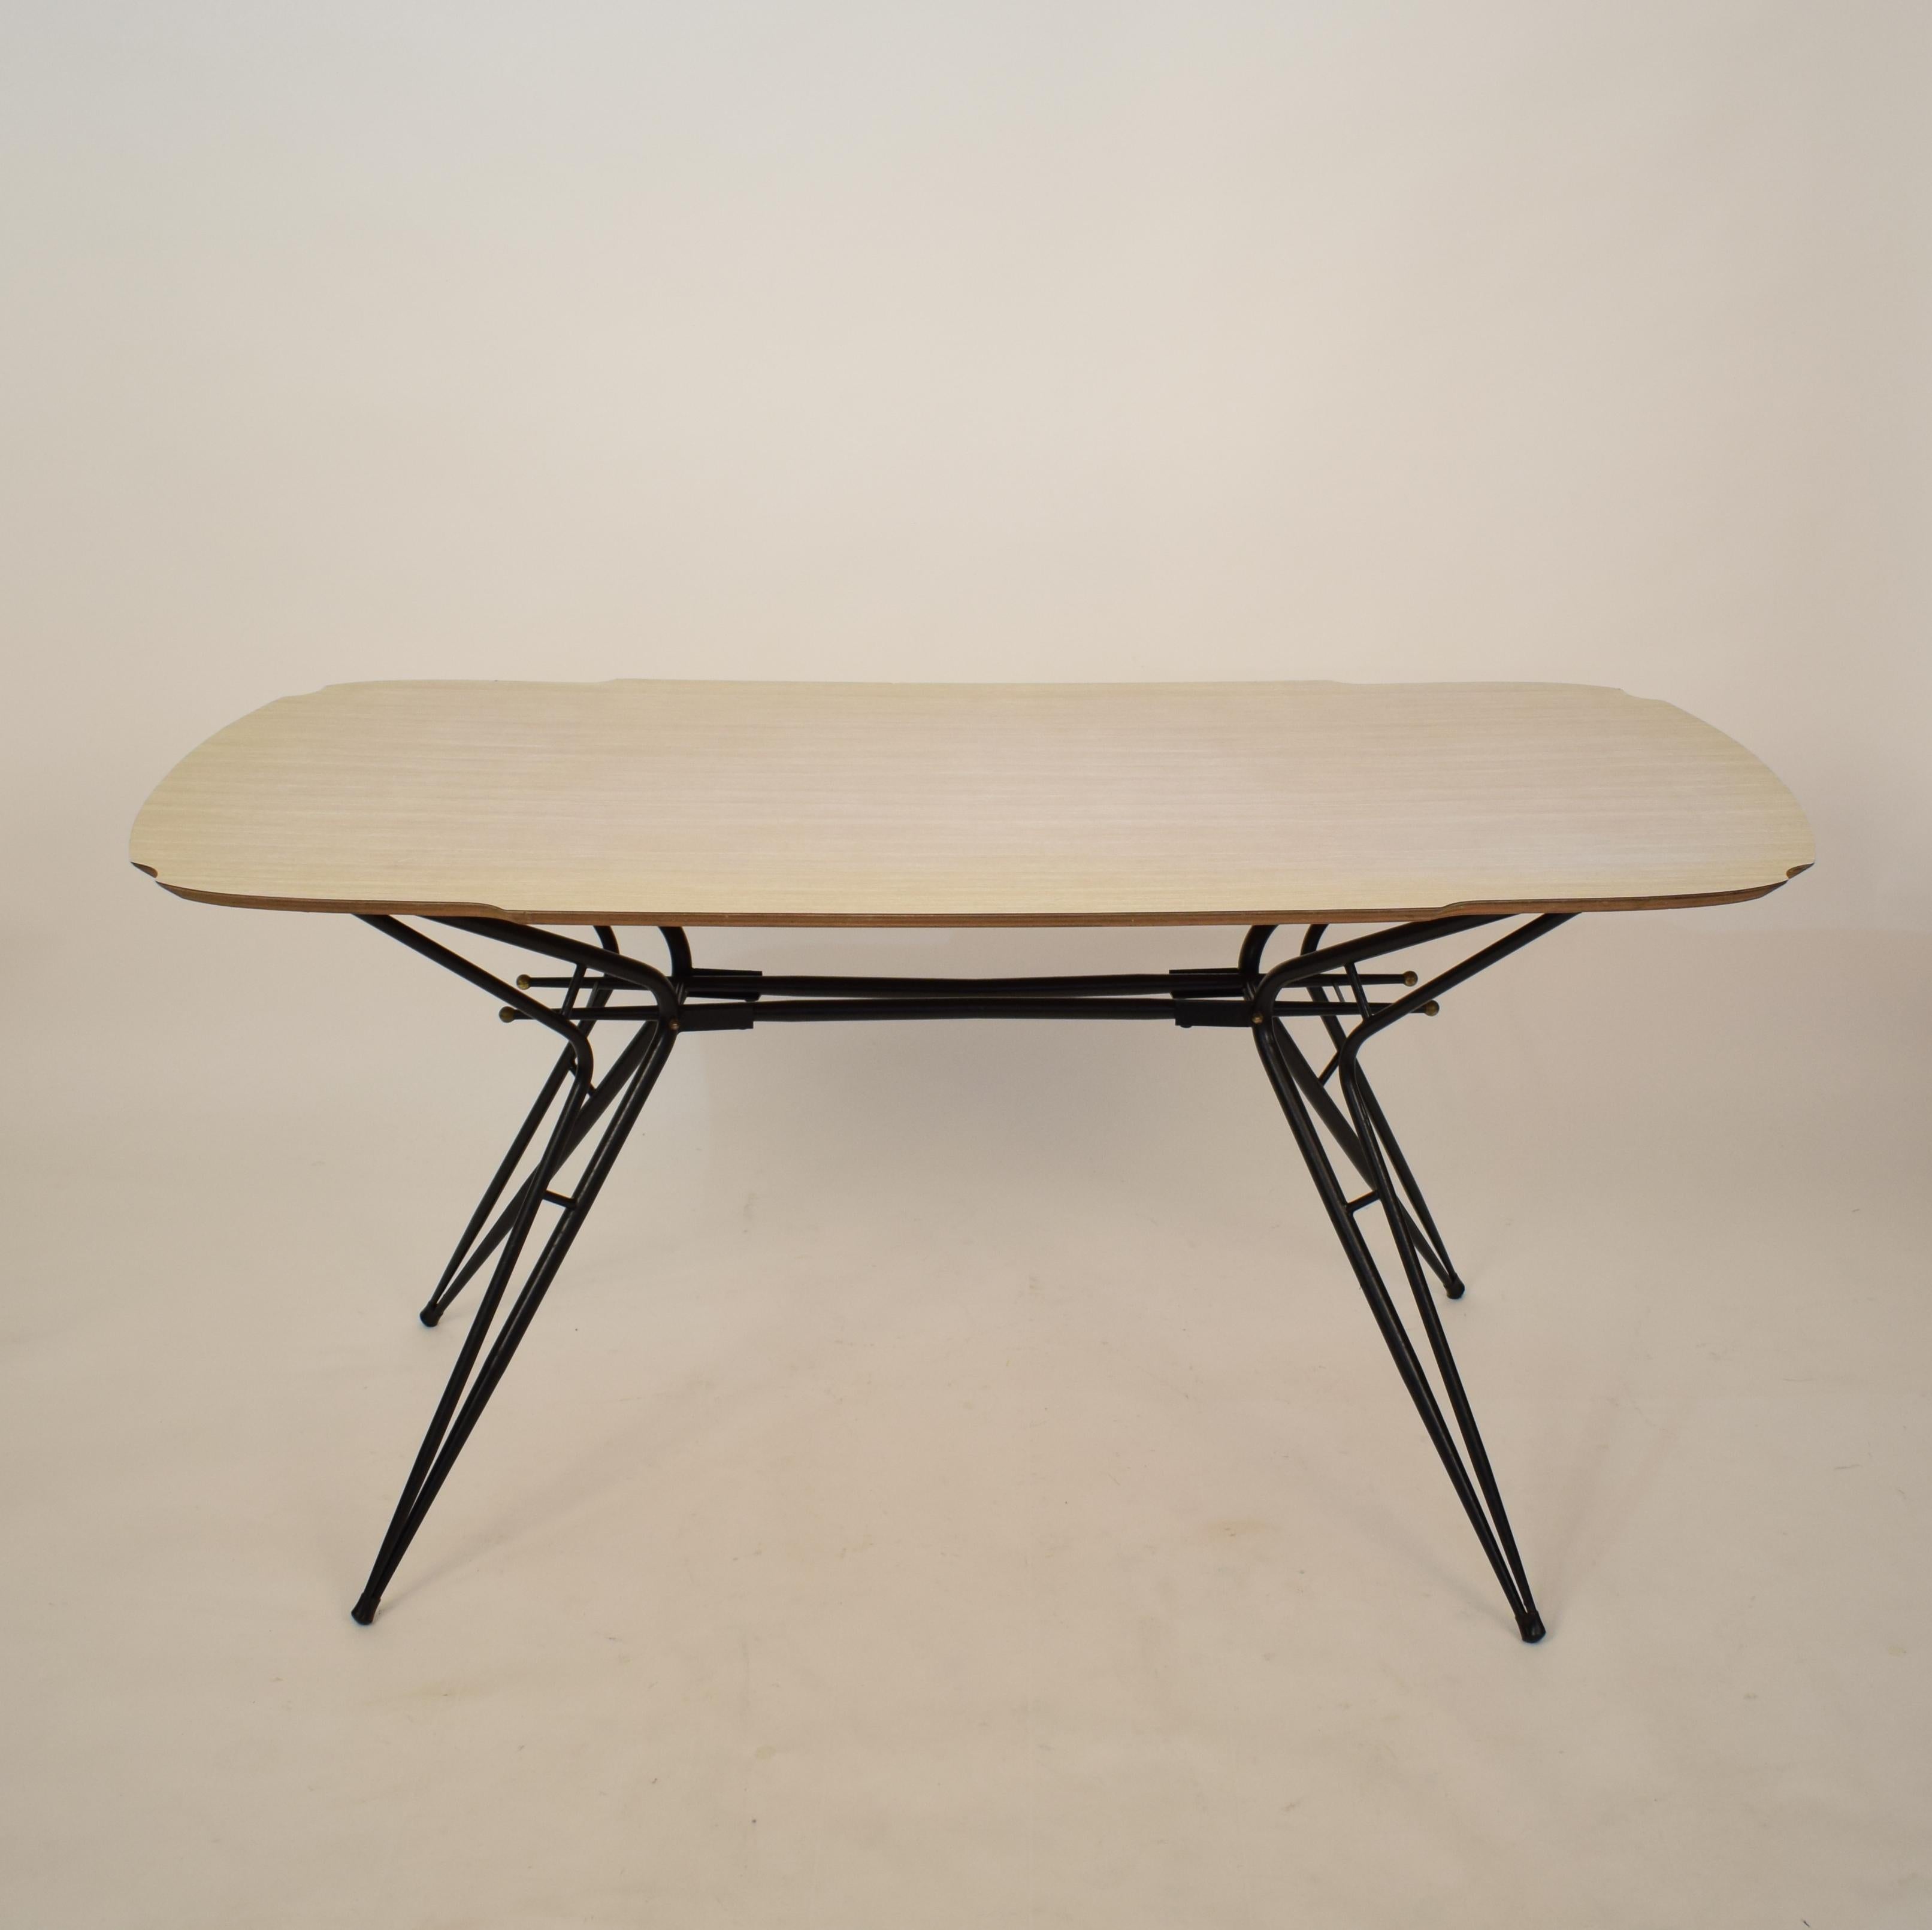 Midcentury Italian Black and White Dining Table Attributed to Ico Parisi, 1958 In Good Condition For Sale In Berlin, DE